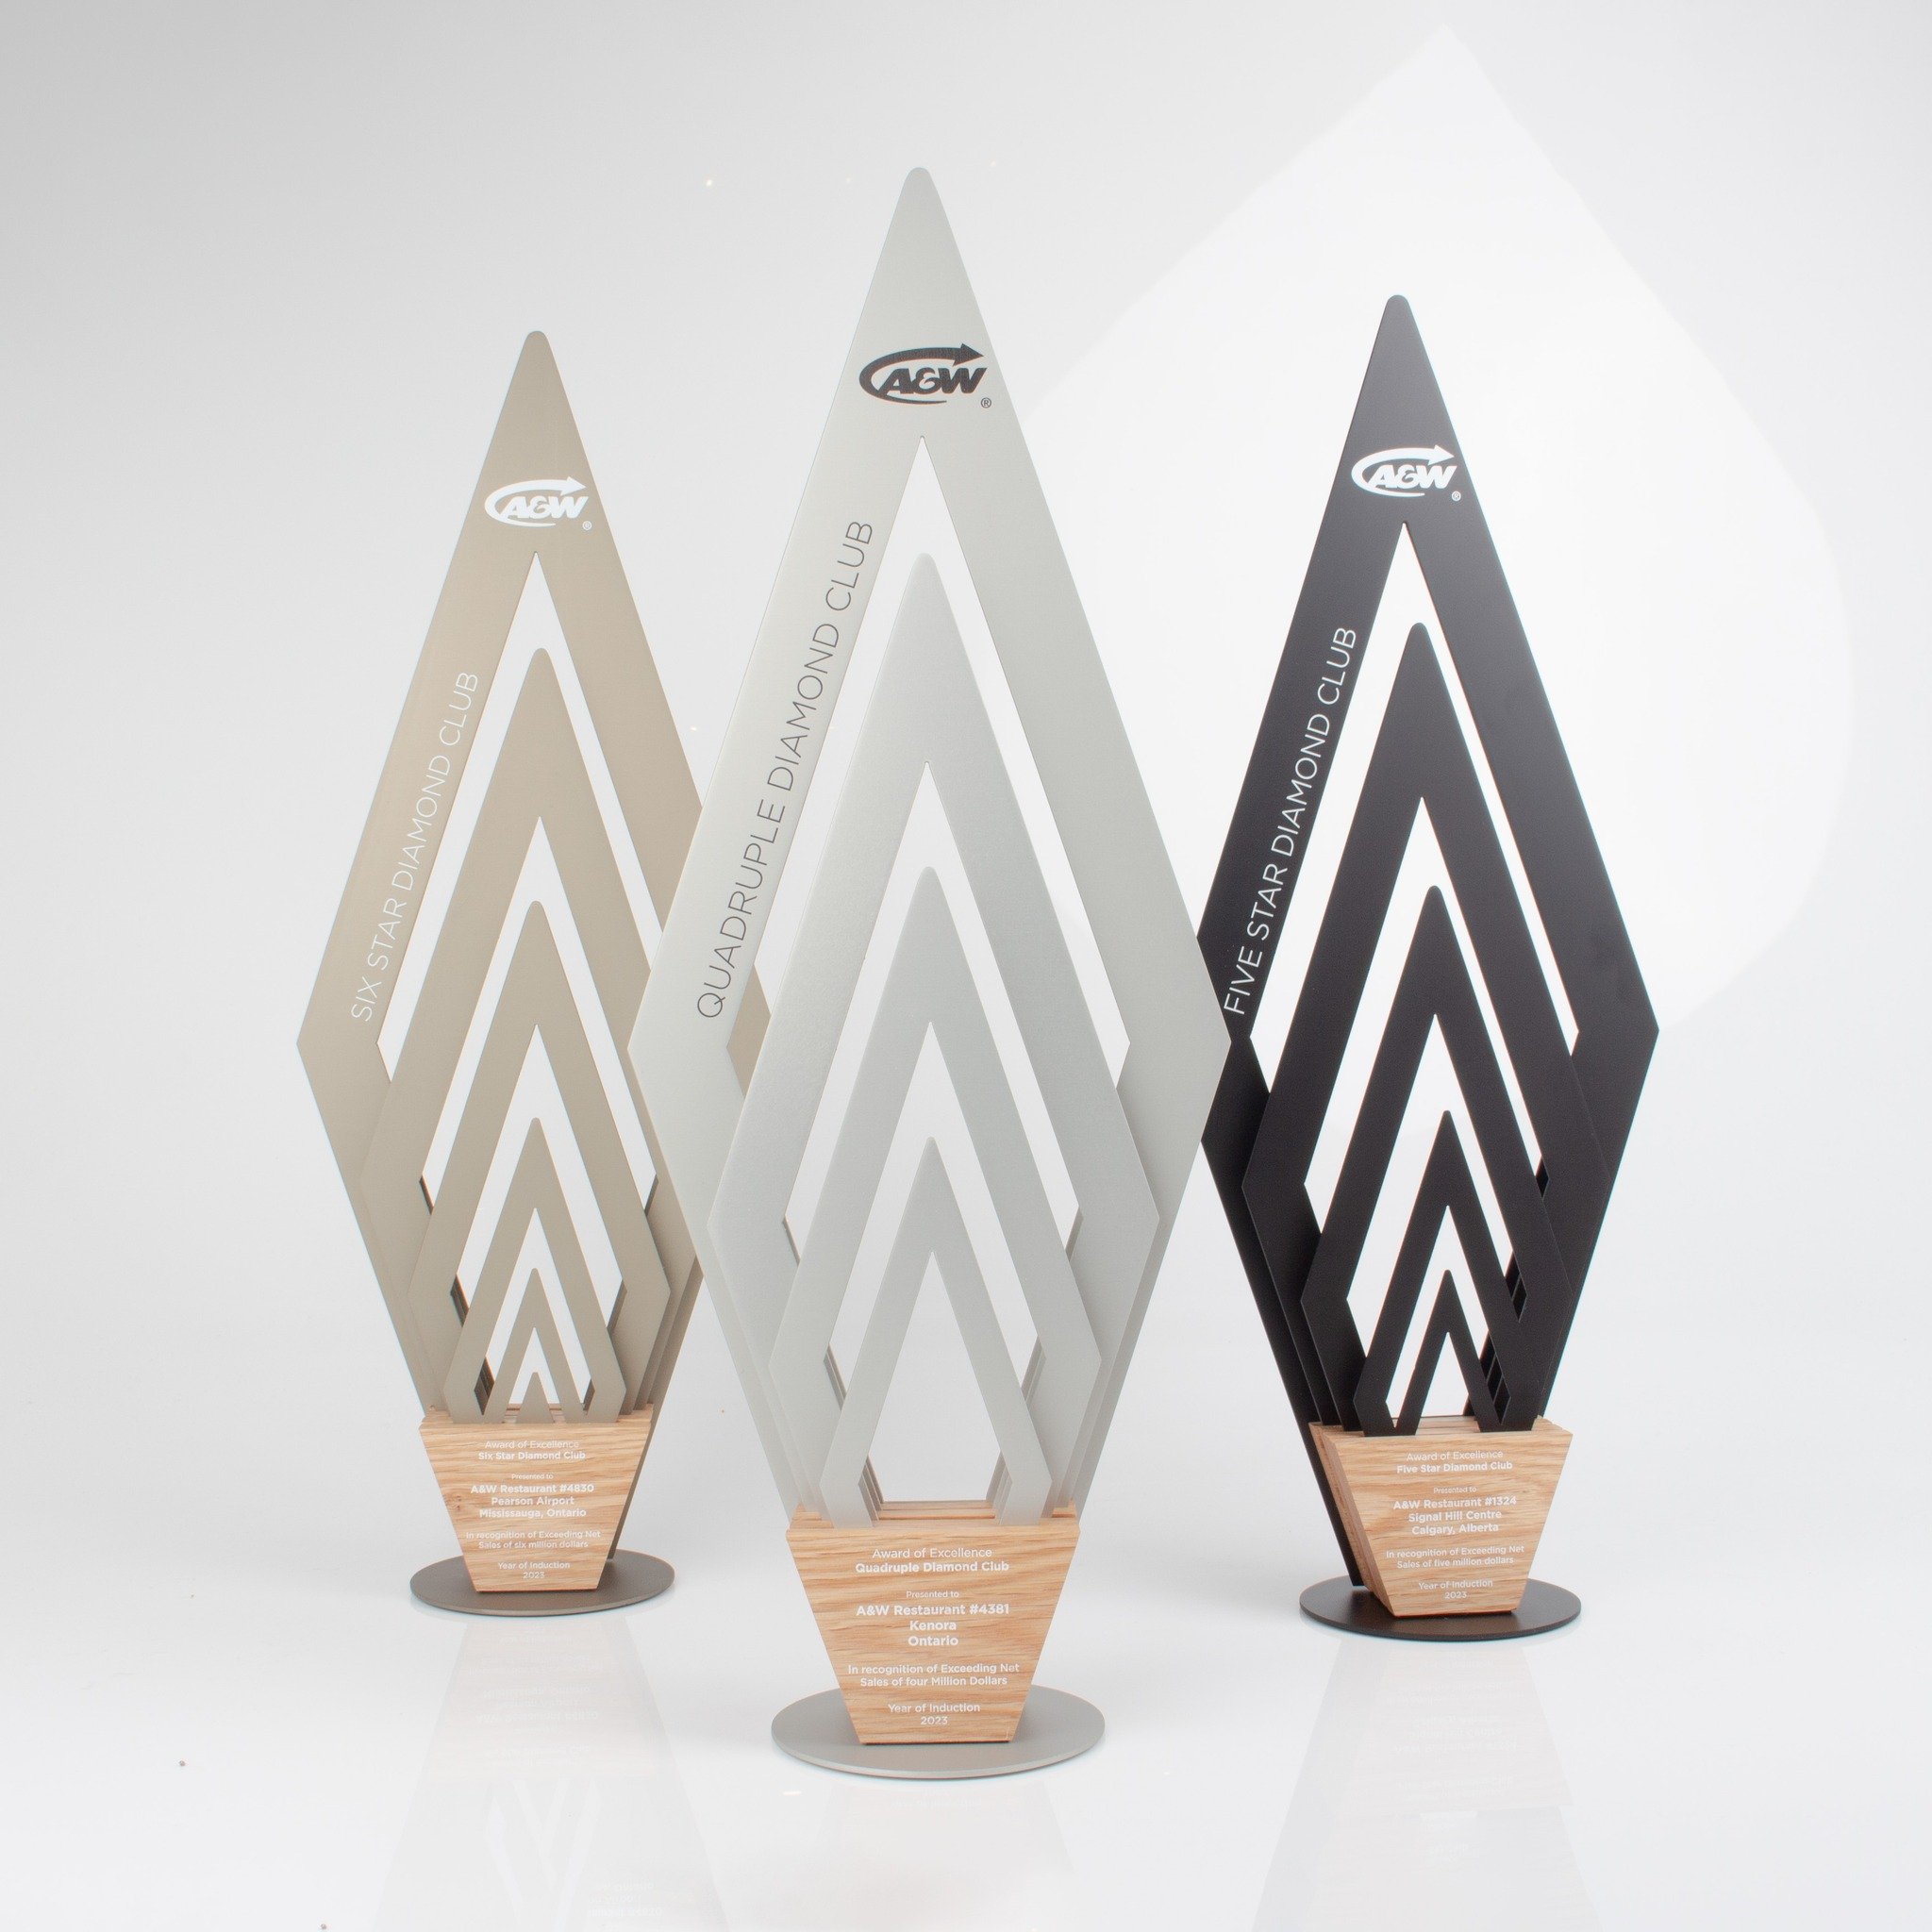 It's always a pleasure working with @awcanada 🙌

These striking employee recognition awards are another great example of the unique concepts our design team are capable of crafting 👏

[ ] #customtrophy #customtrophies #customawards #moderndesign #c